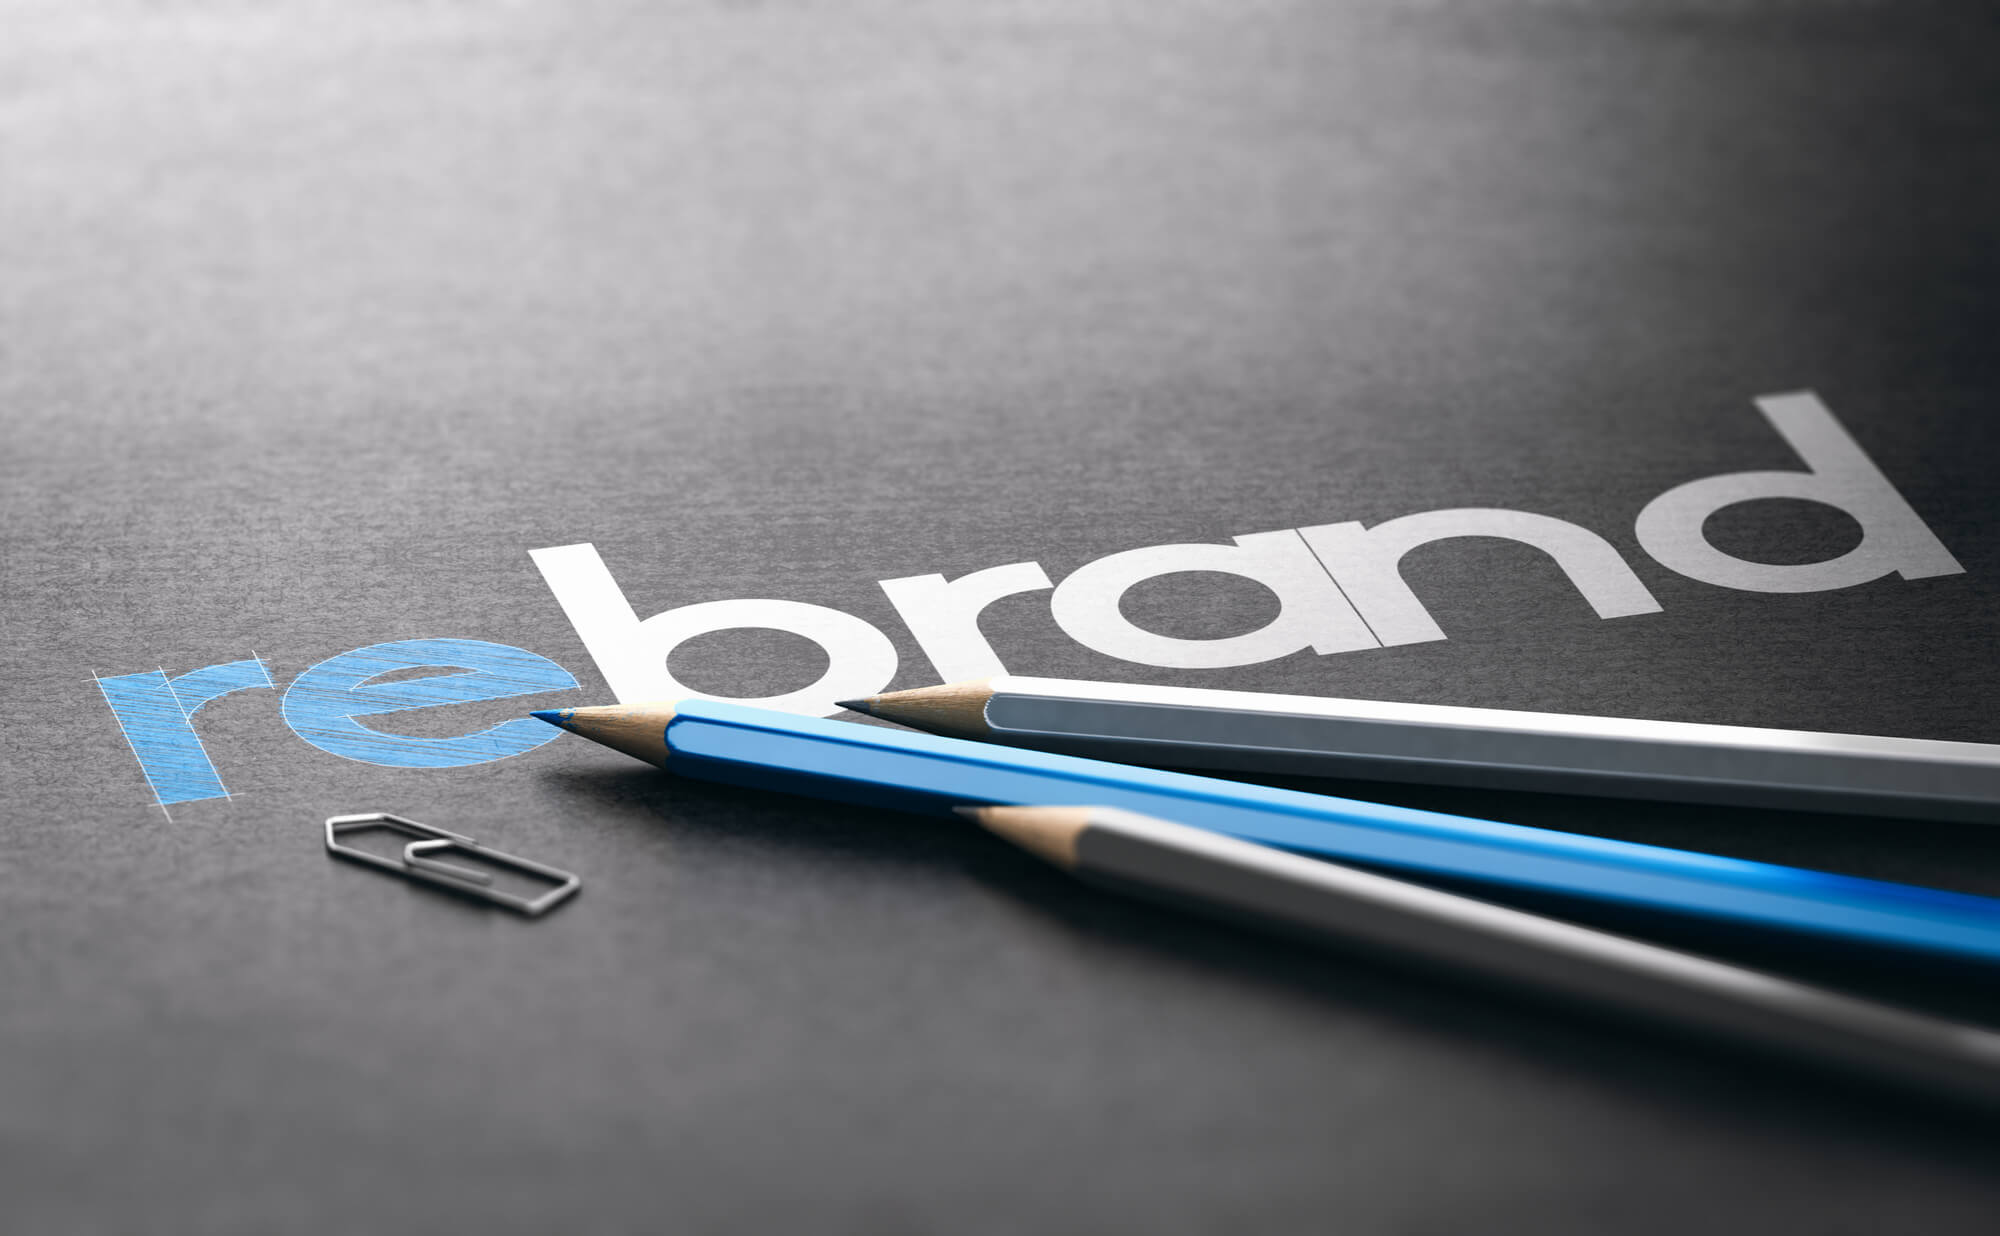 How to Successfully Rebrand Your Business